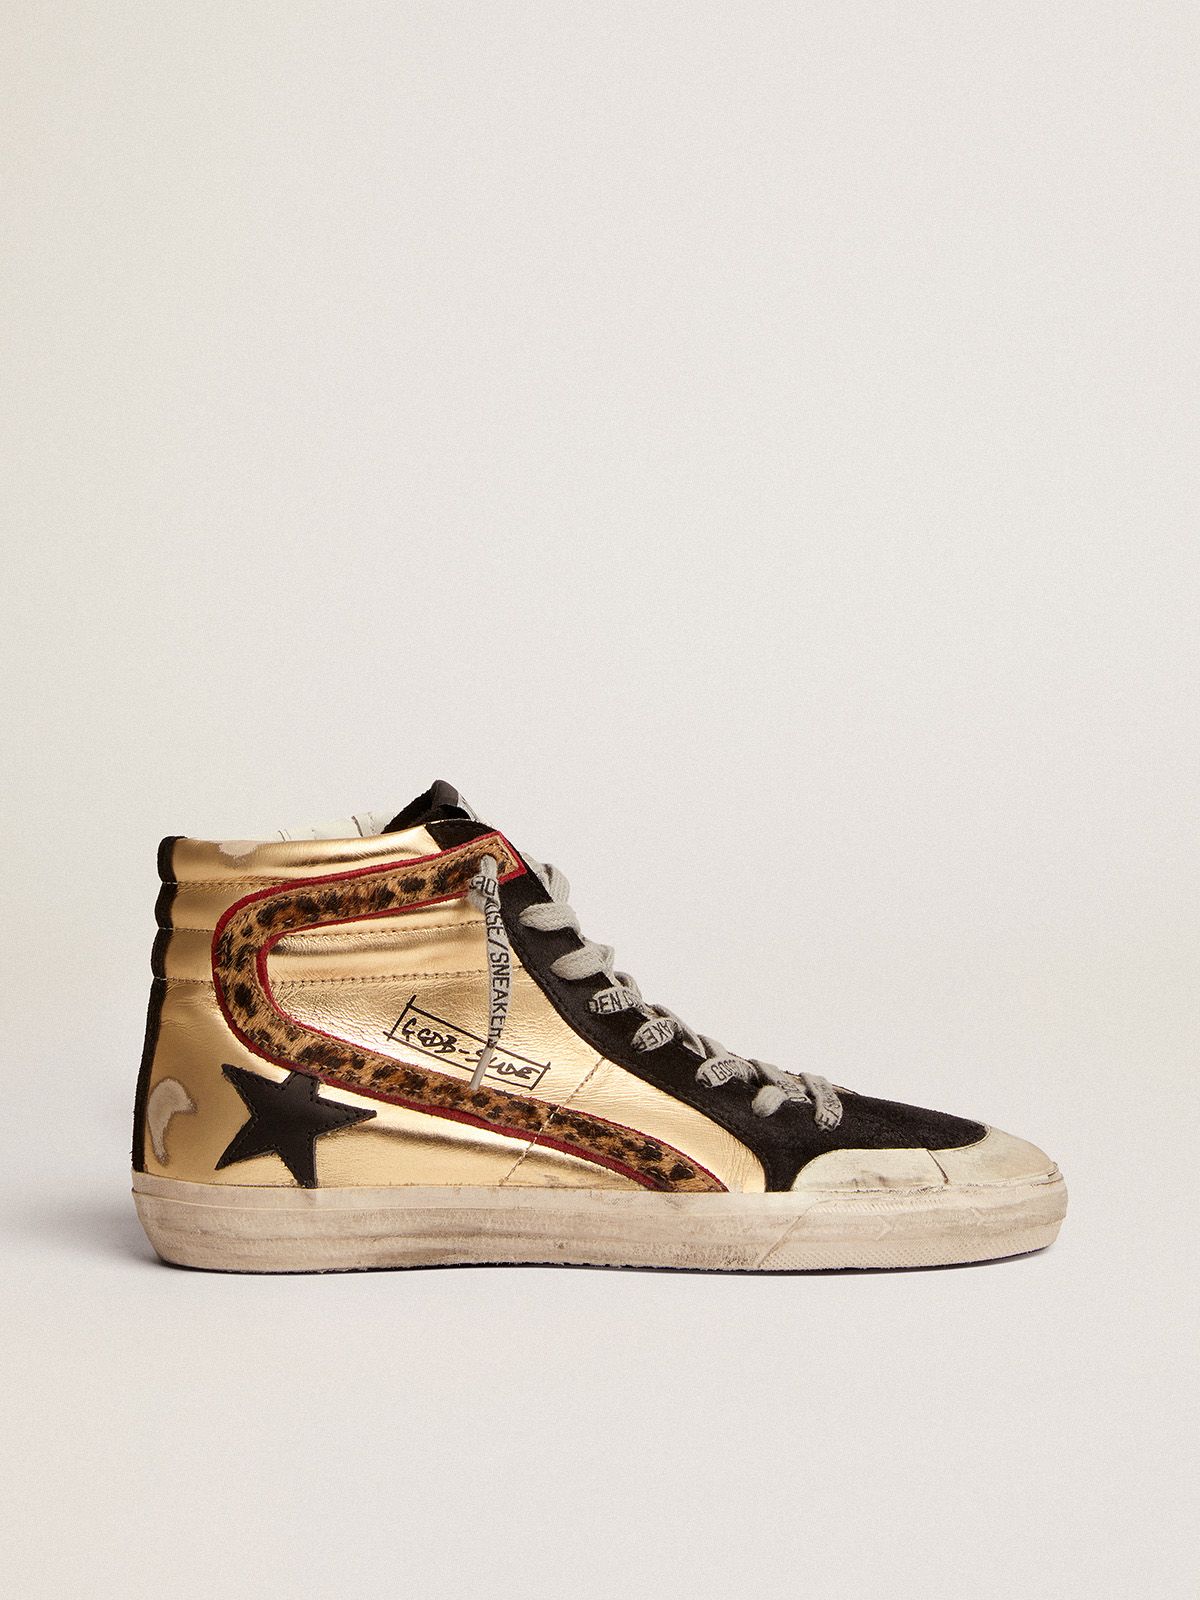 Penstar Slide sneakers in gold leather with black leather star and leopard-print pony skin insert